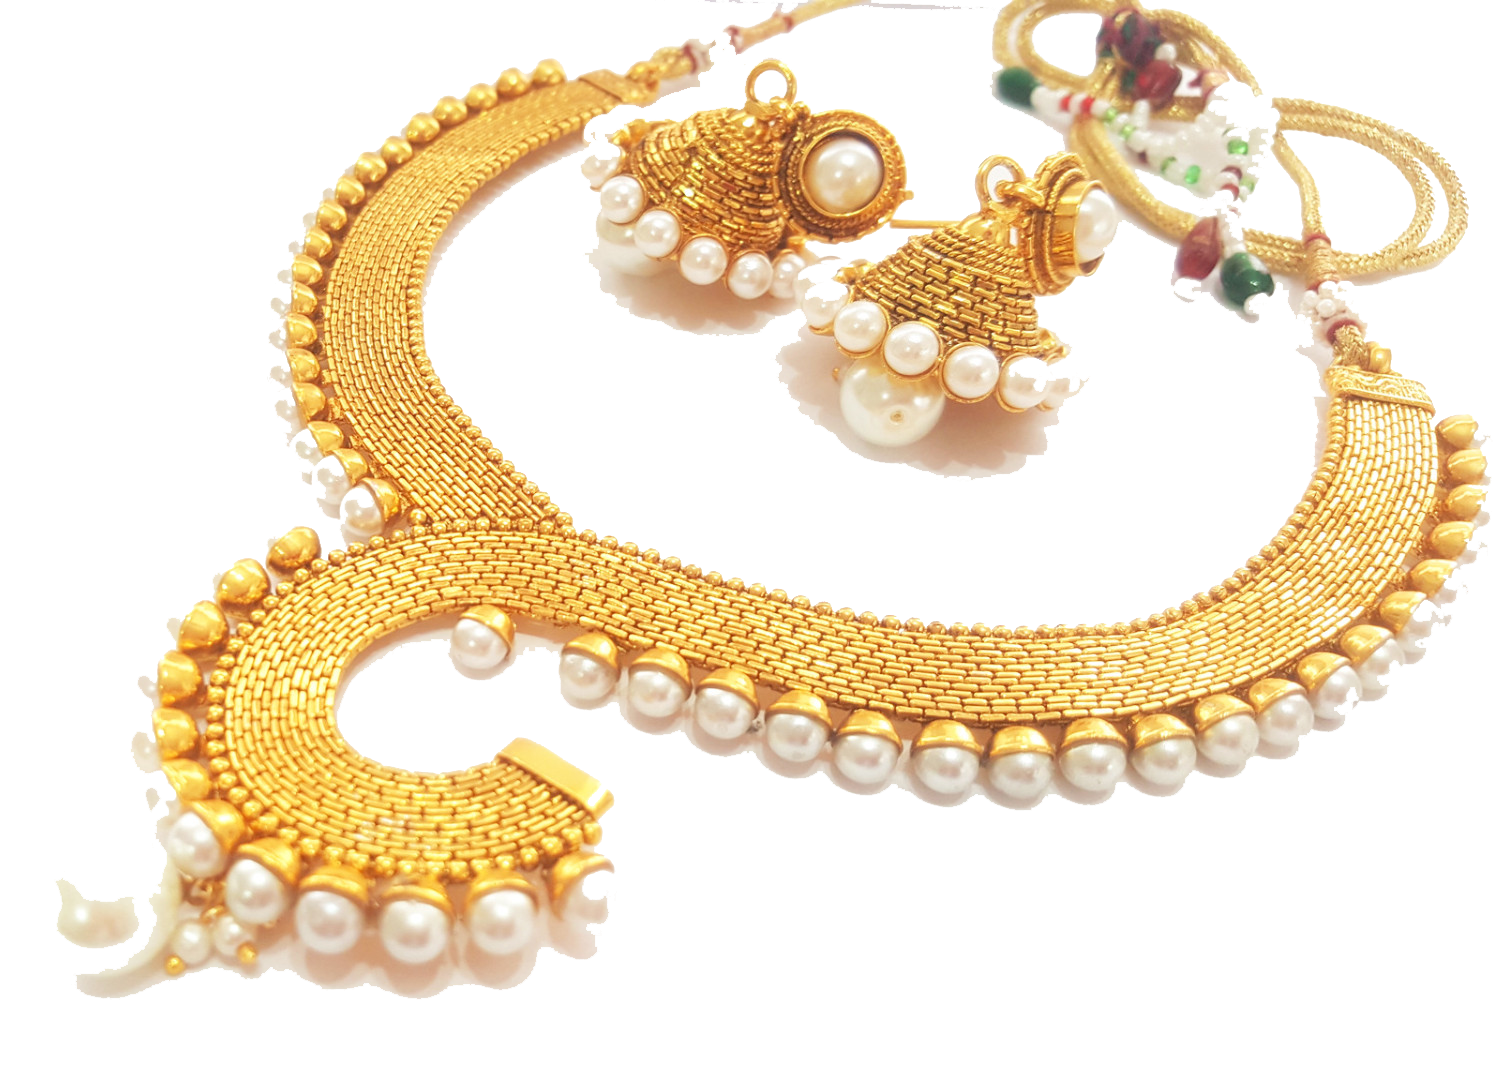 Indian Jewellery Png Photo - Jewelry Images, Transparent background PNG HD thumbnail